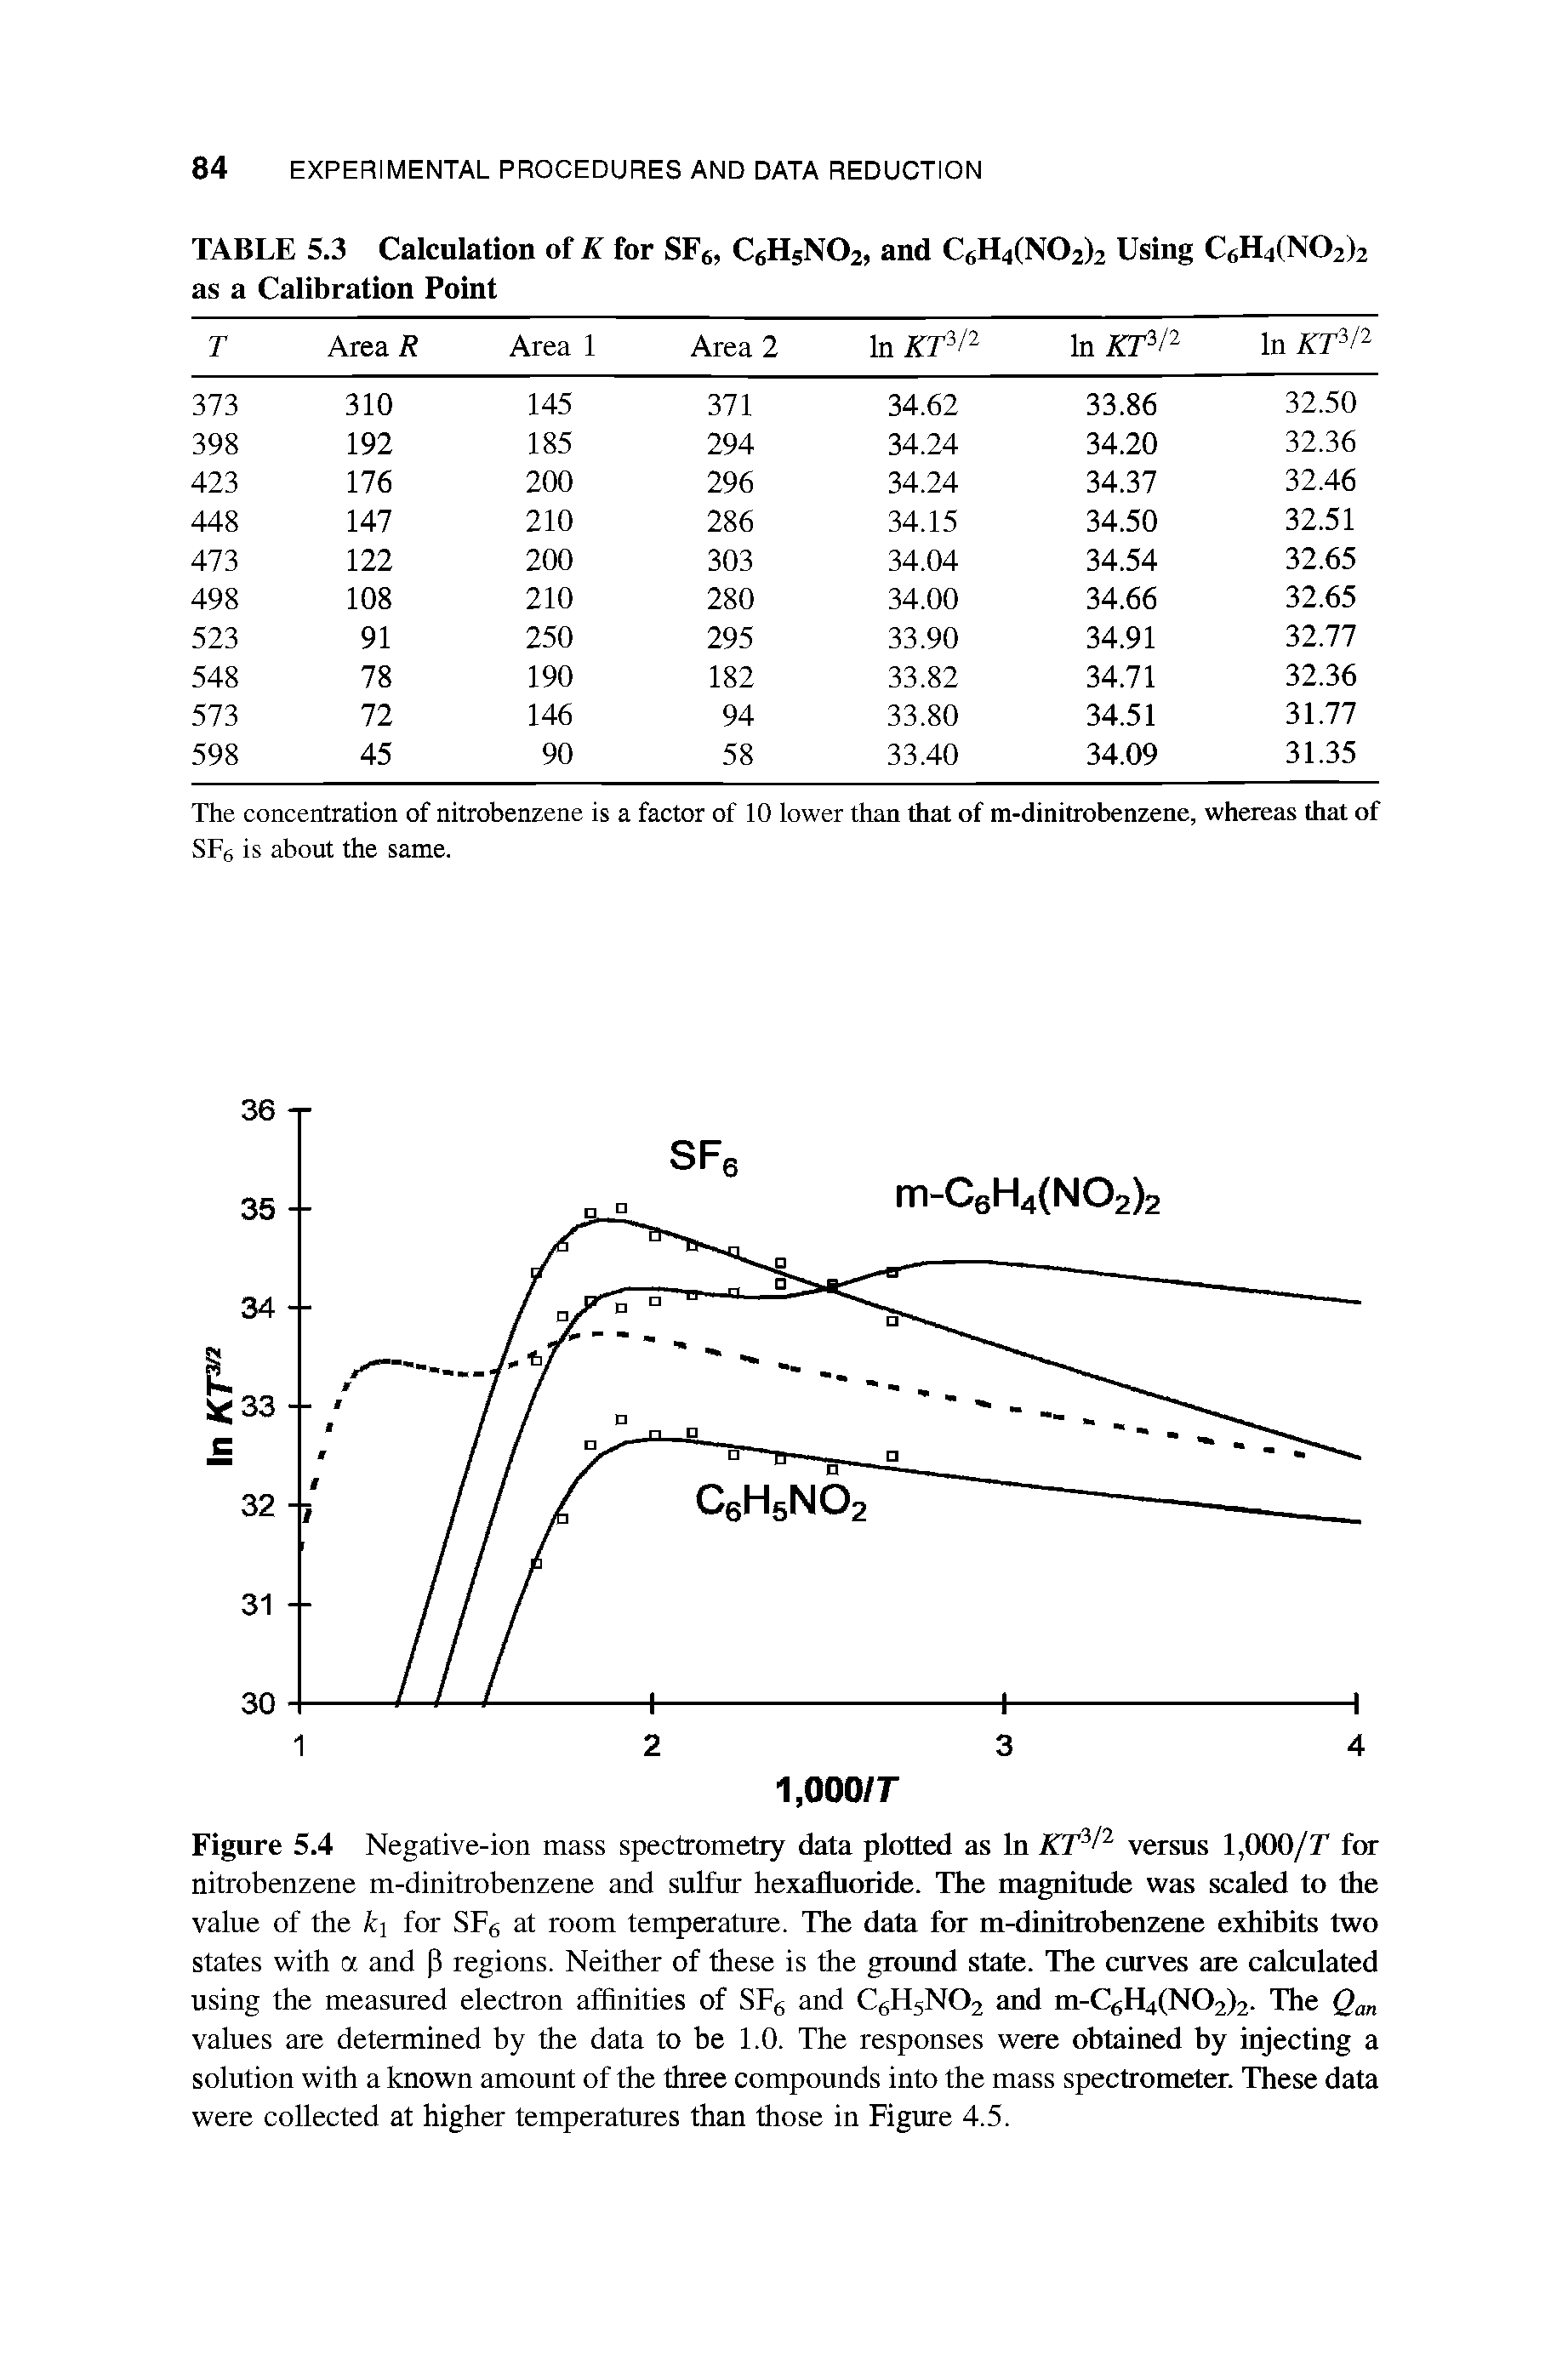 Figure 5.4 Negative-ion mass spectrometry data plotted as In KT3/2 versus 1,000/7 for nitrobenzene m-dinitrobenzene and sulfur hexafluoride. The magnitude was scaled to the value of the kt for SF6 at room temperature. The data for m-dinitrohenzene exhibits two states with a and P regions. Neither of these is the ground state. The curves are calculated using the measured electron affinities of SF6 and C6F15N02 and m-C6H4(N02)2. The Qan values are determined by the data to be 1.0. The responses were obtained by injecting a solution with a known amount of the three compounds into the mass spectrometer. These data were collected at higher temperatures than those in Figure 4.5.